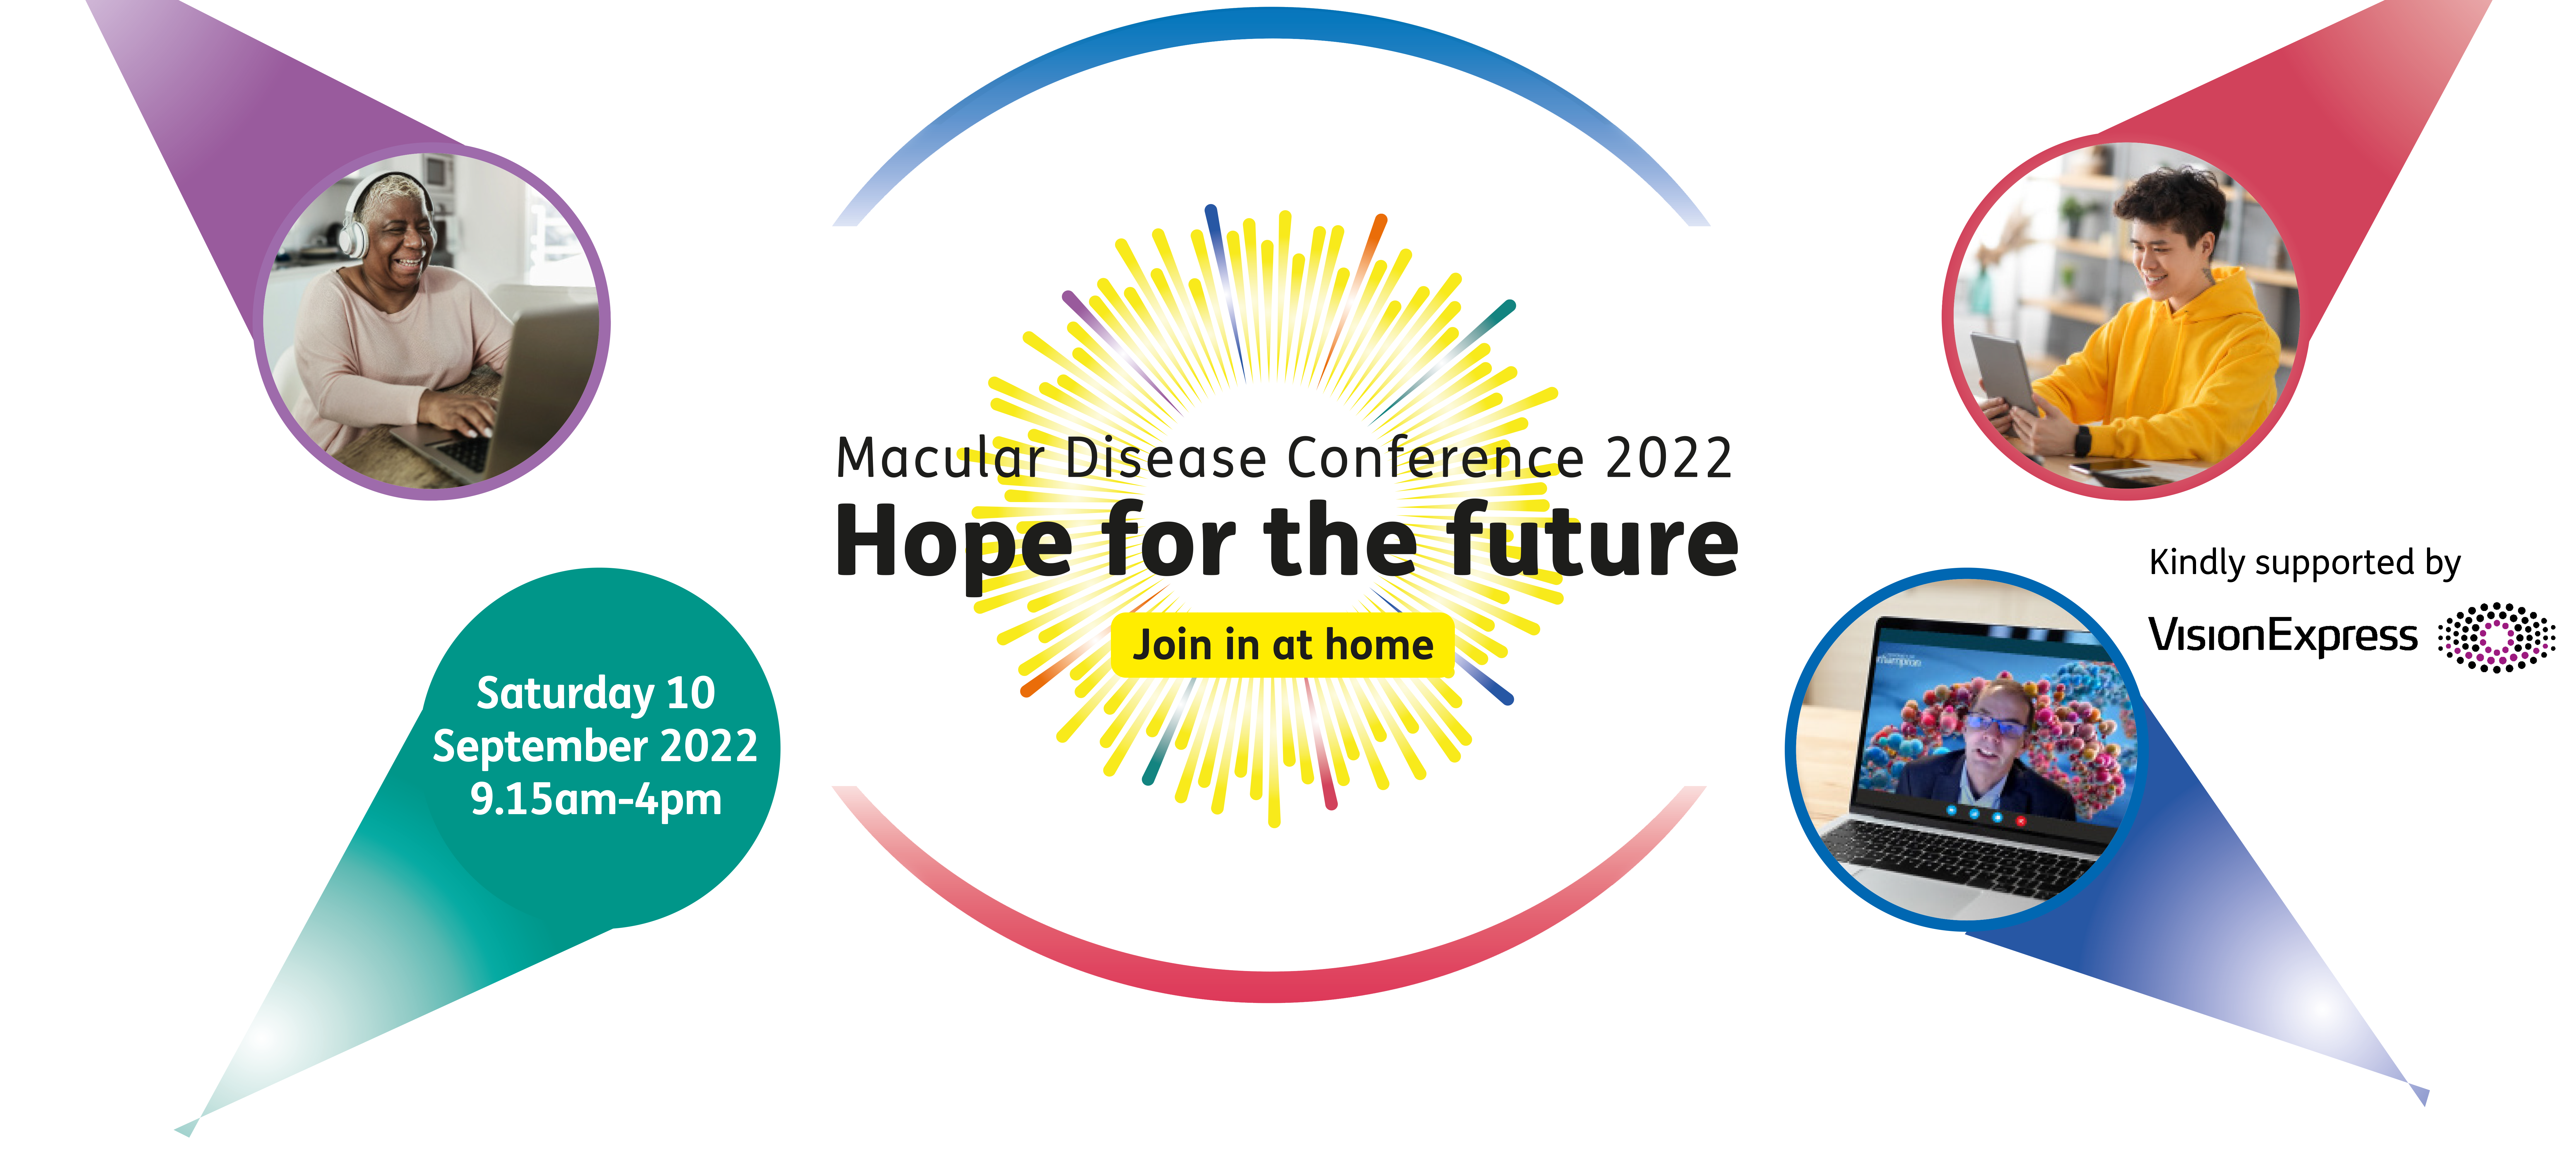 Macular Disease Conference 2022 primary image